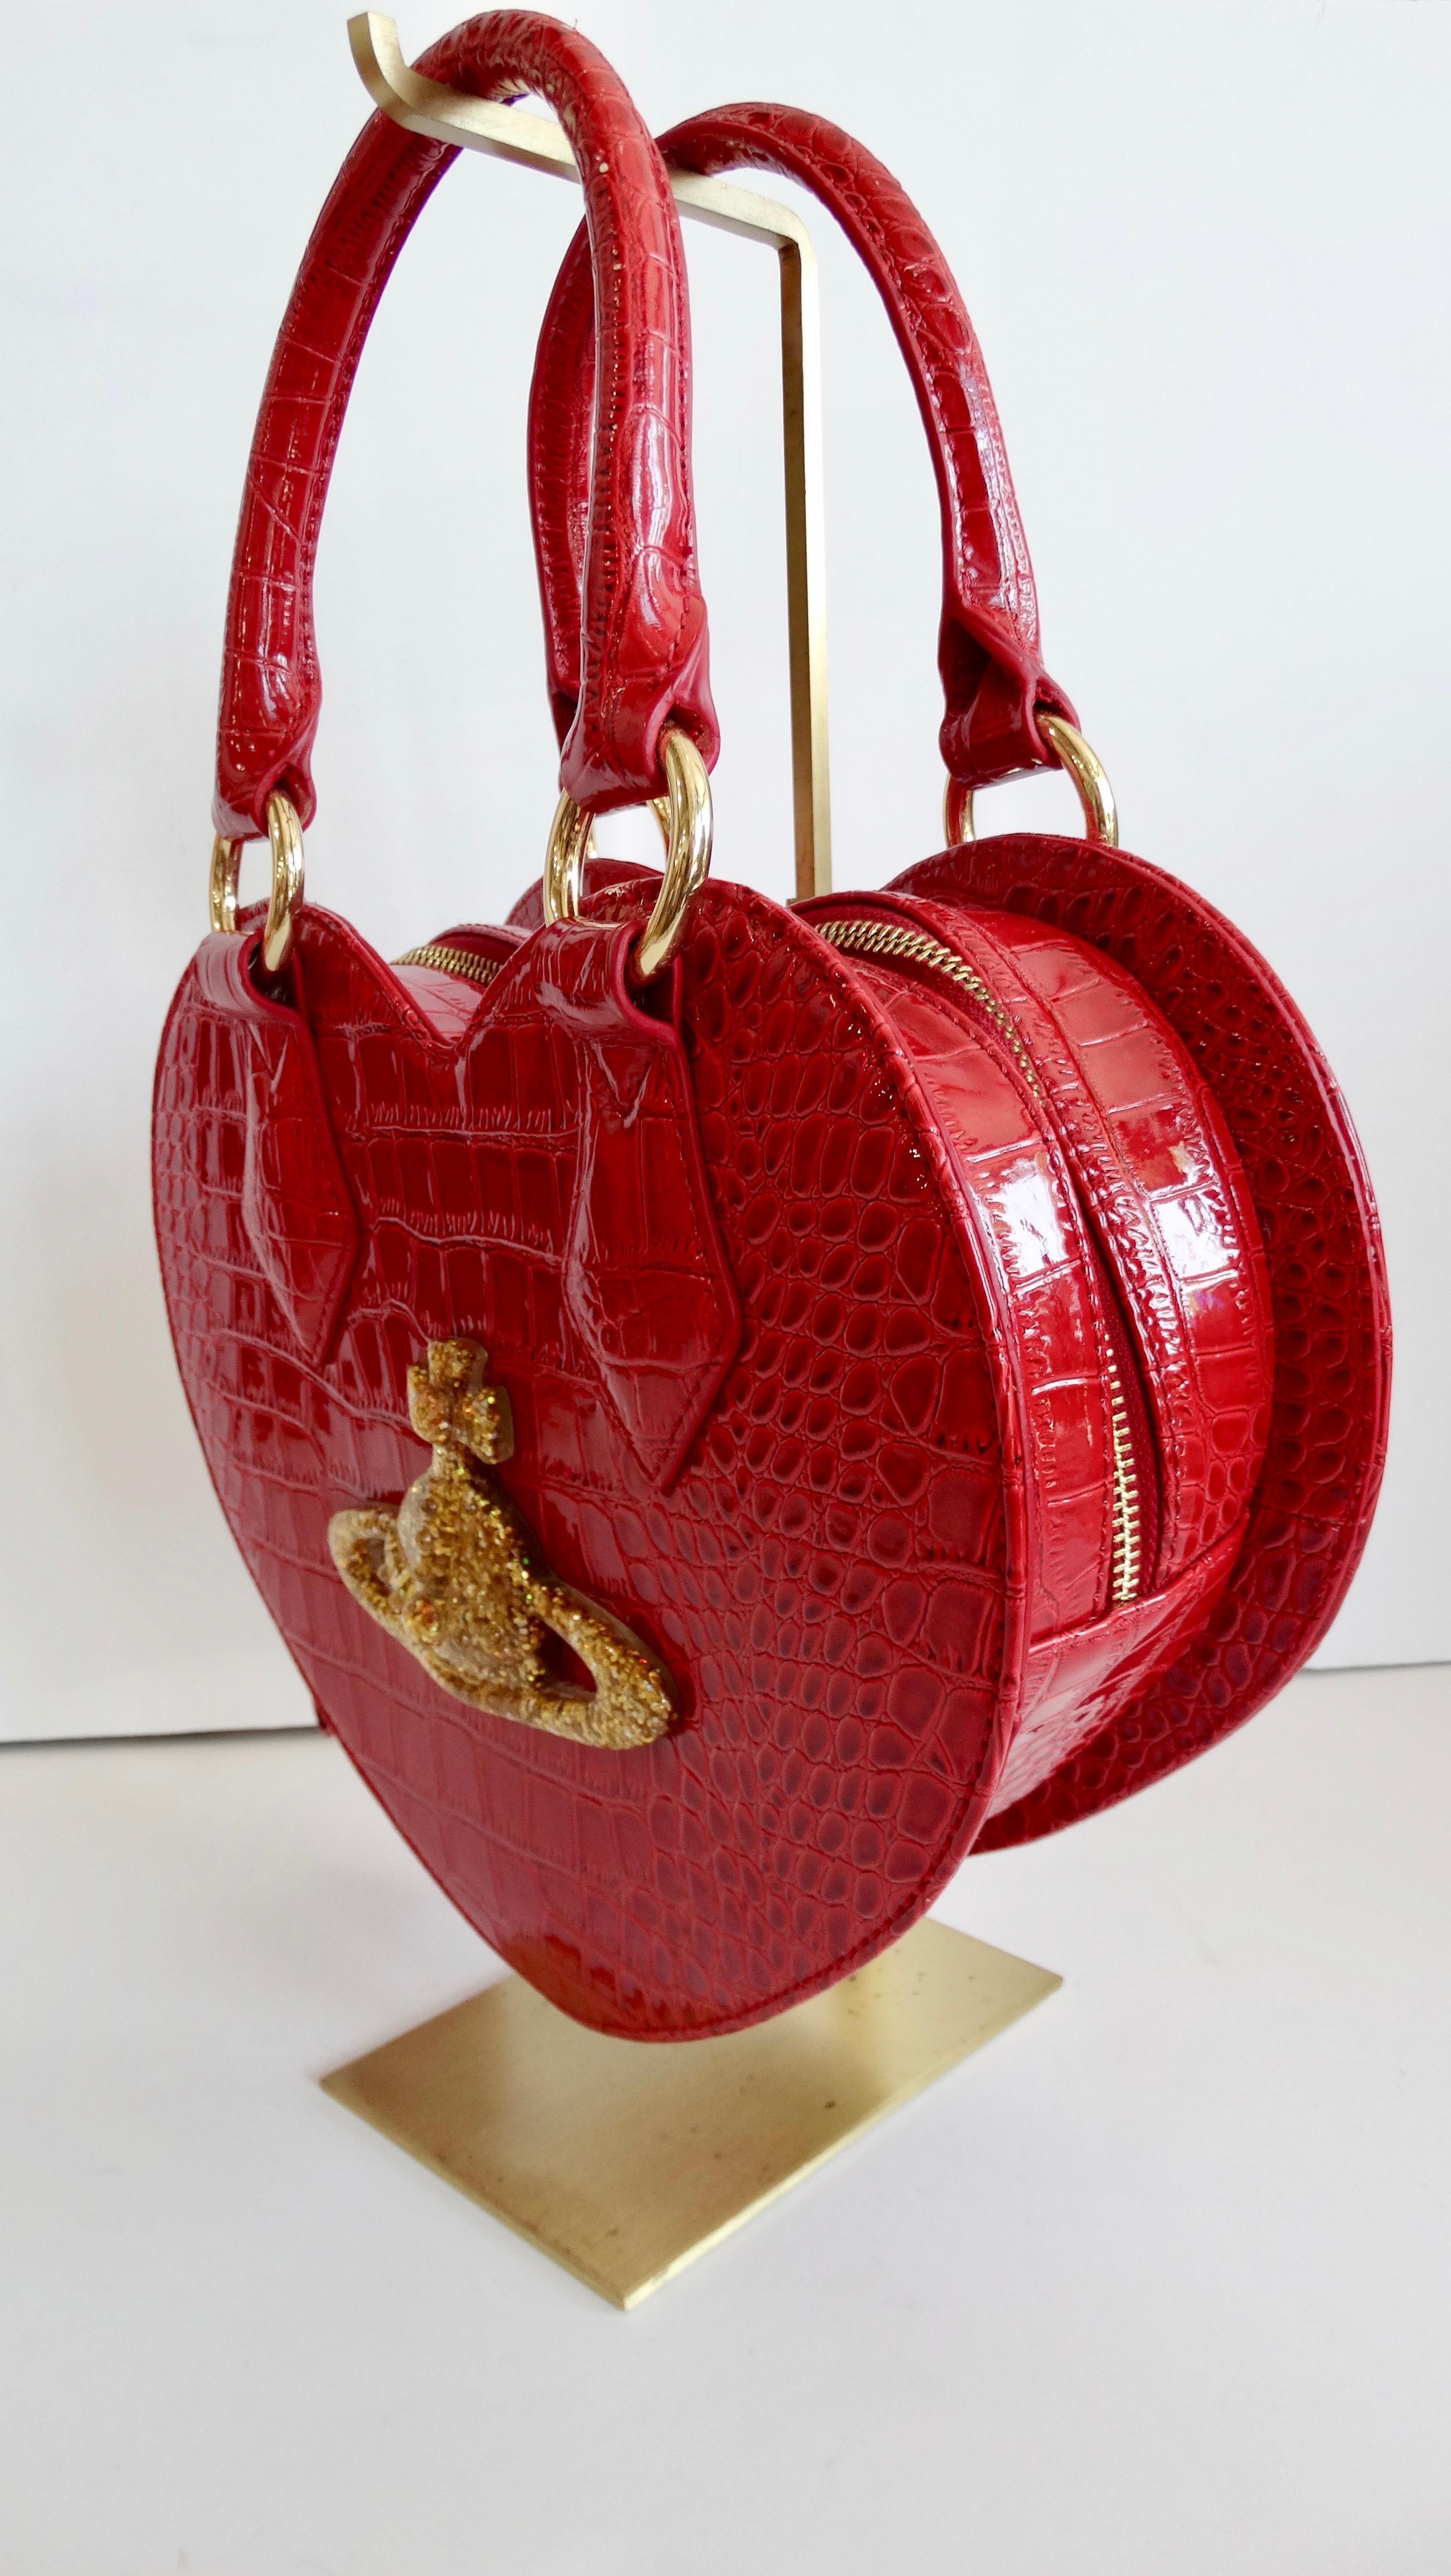 Show your love for Vivienne Westwood with this adorable vintage Chancery heart bag! Circa late 21st century, this rare heart bag is made of alligator embossed patent leather and features gold-tone hardware, dual top handles, and a detachable flat